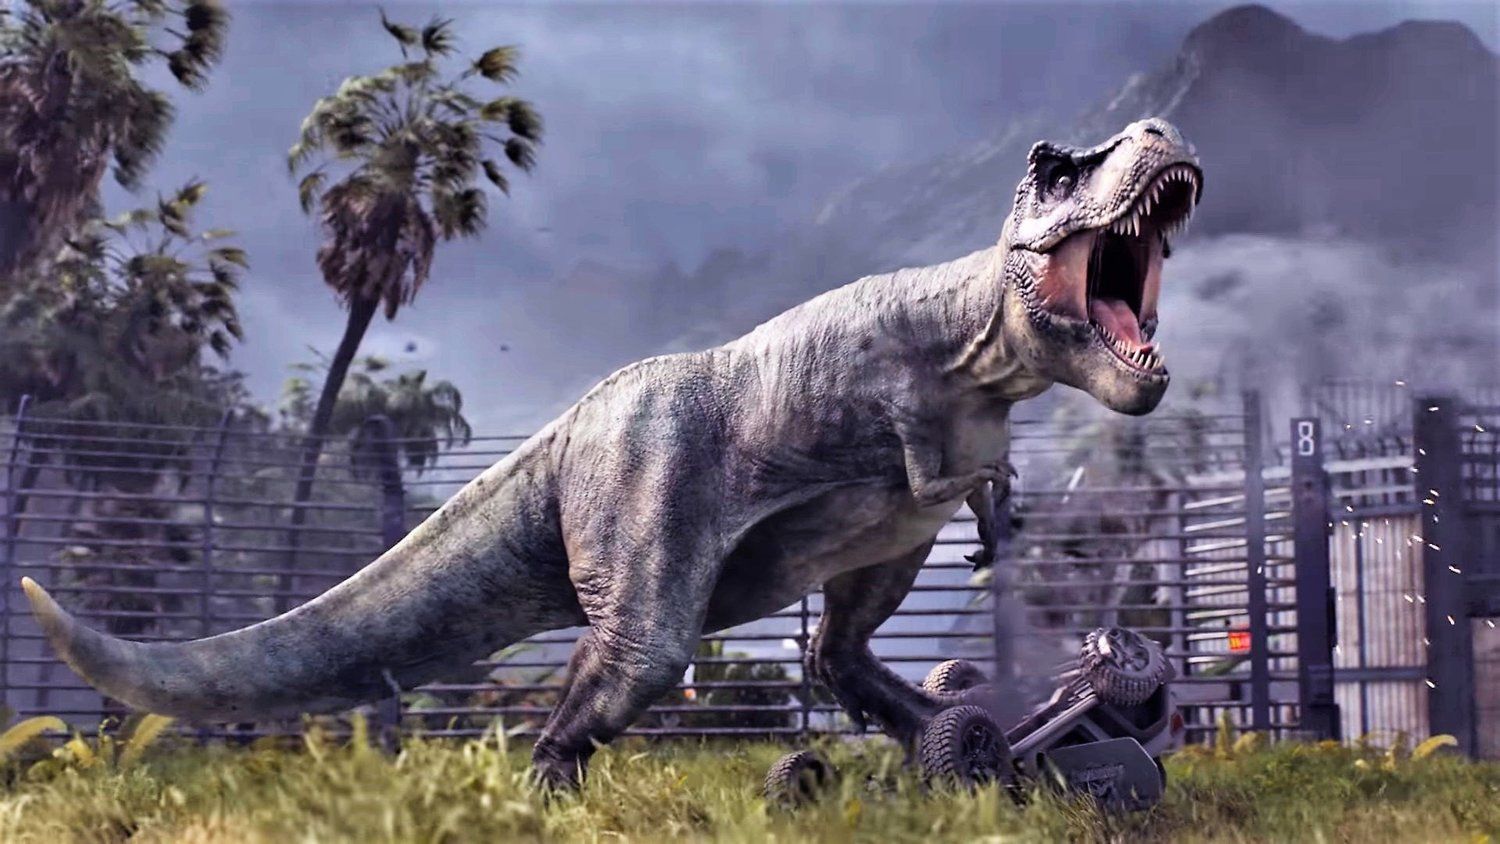 You can also upload and share your favorite Jurassic World Indominus Rex wa...